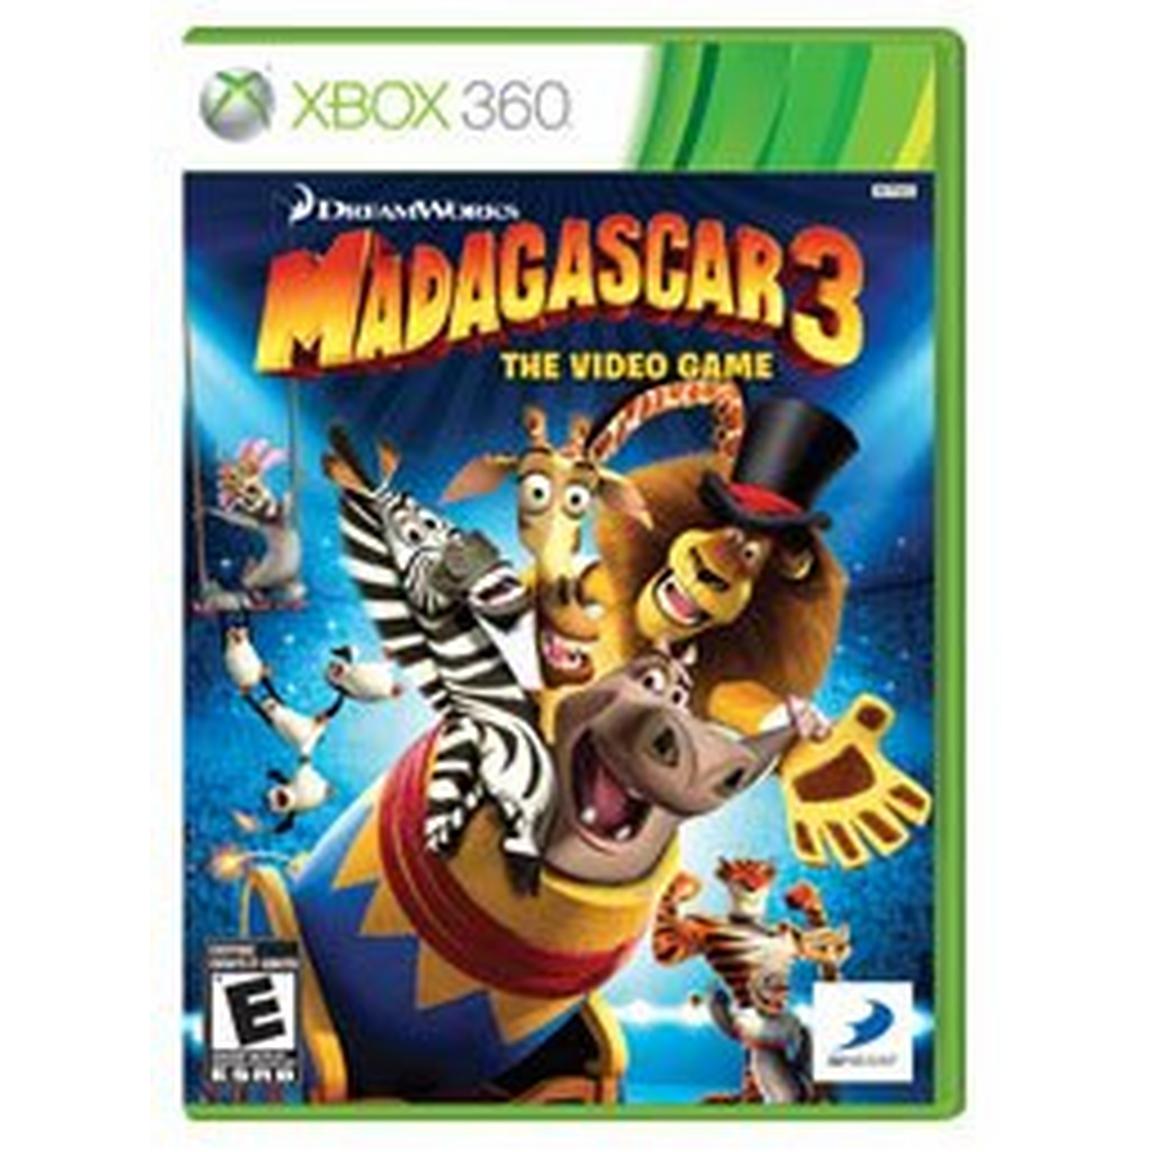 Madagascar 3: The Video Game - Xbox 360, Pre-Owned